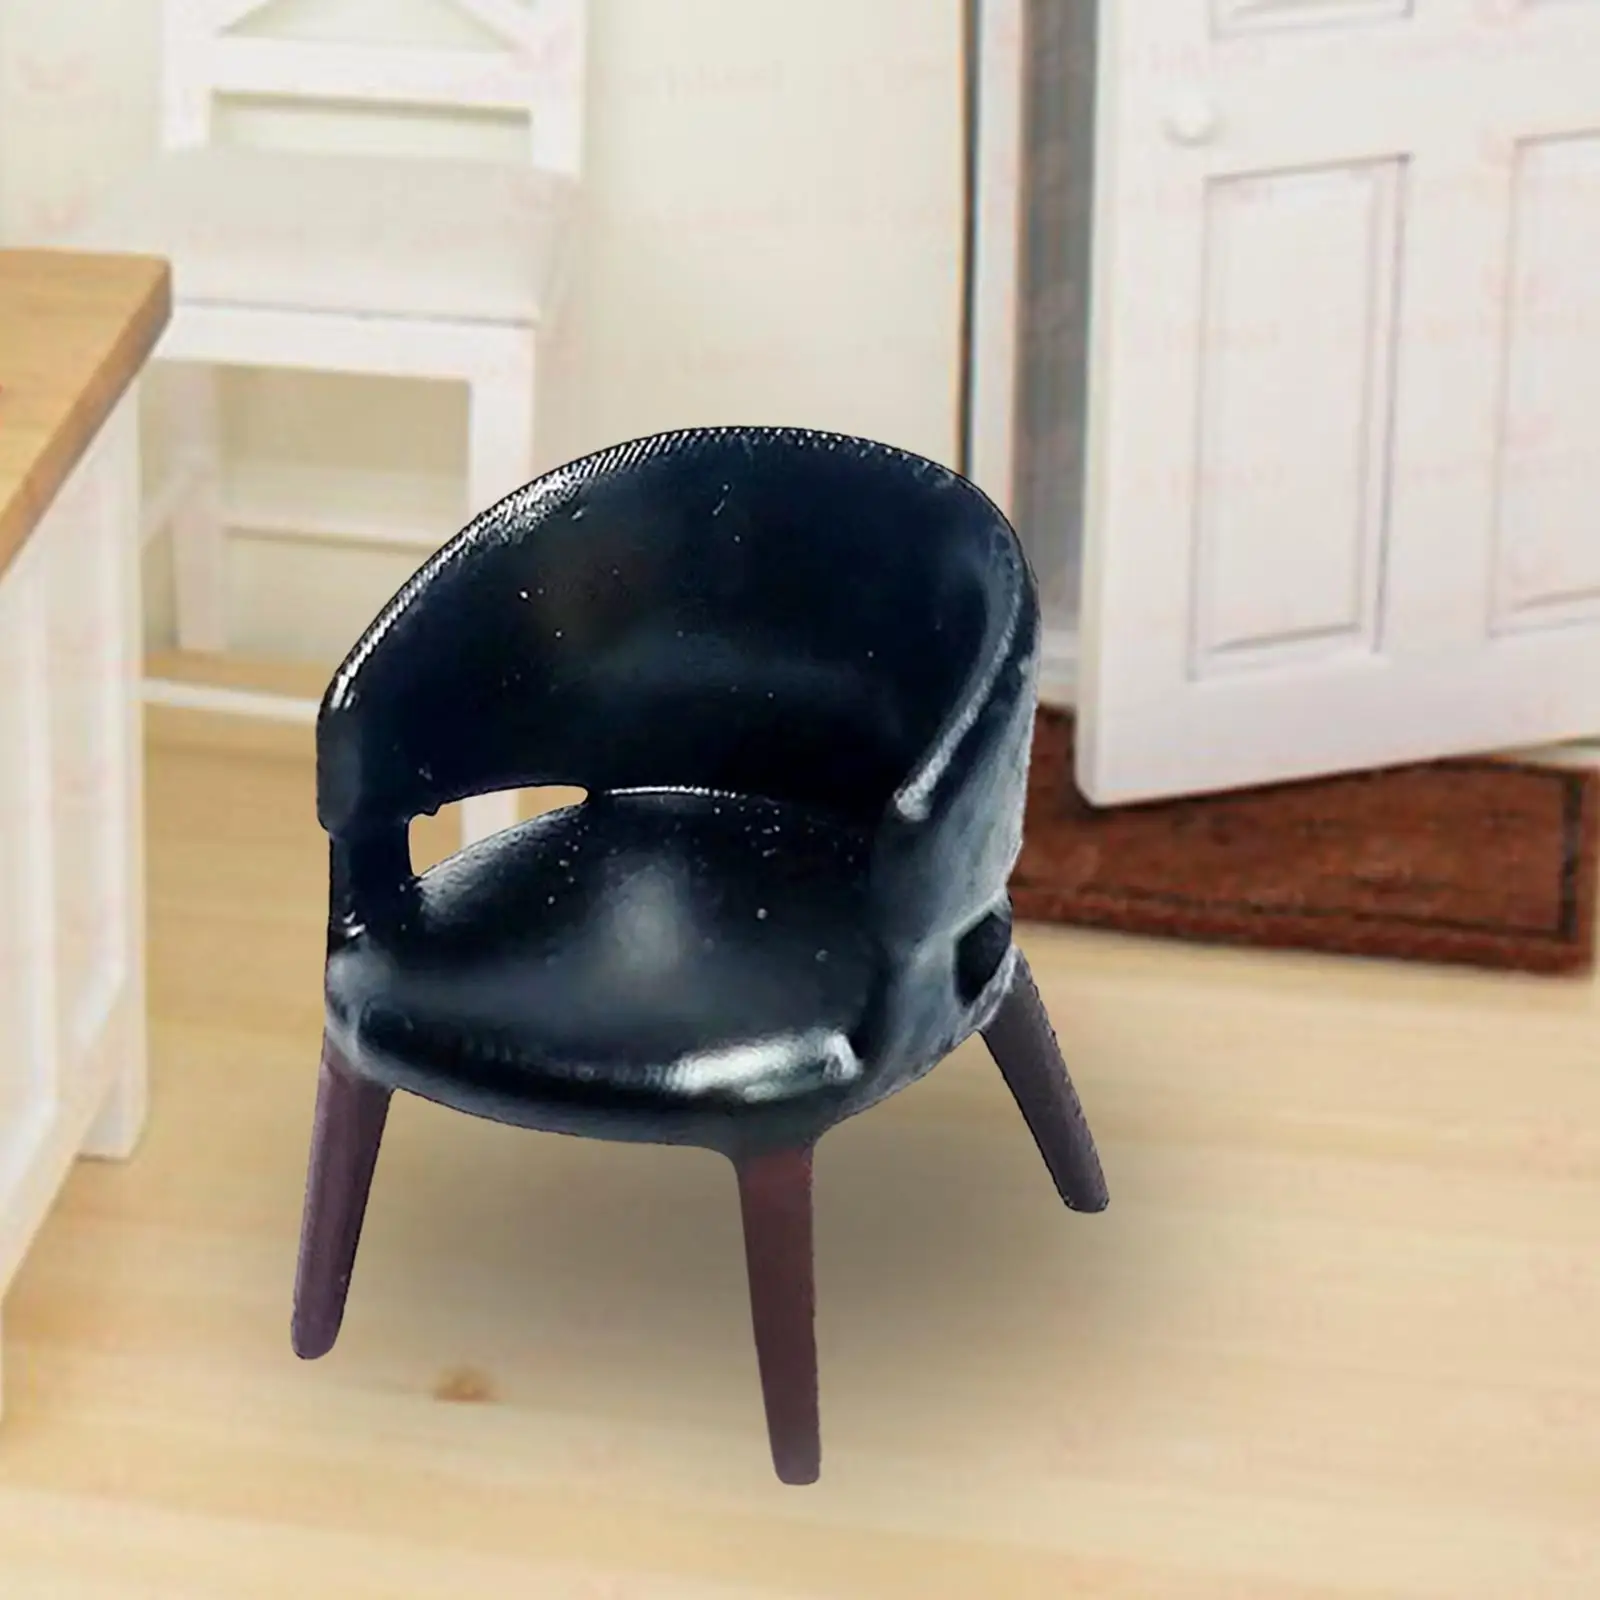 Miniature 1/87 Scale Armchair Resin for DIY Projects Decor Photography Props